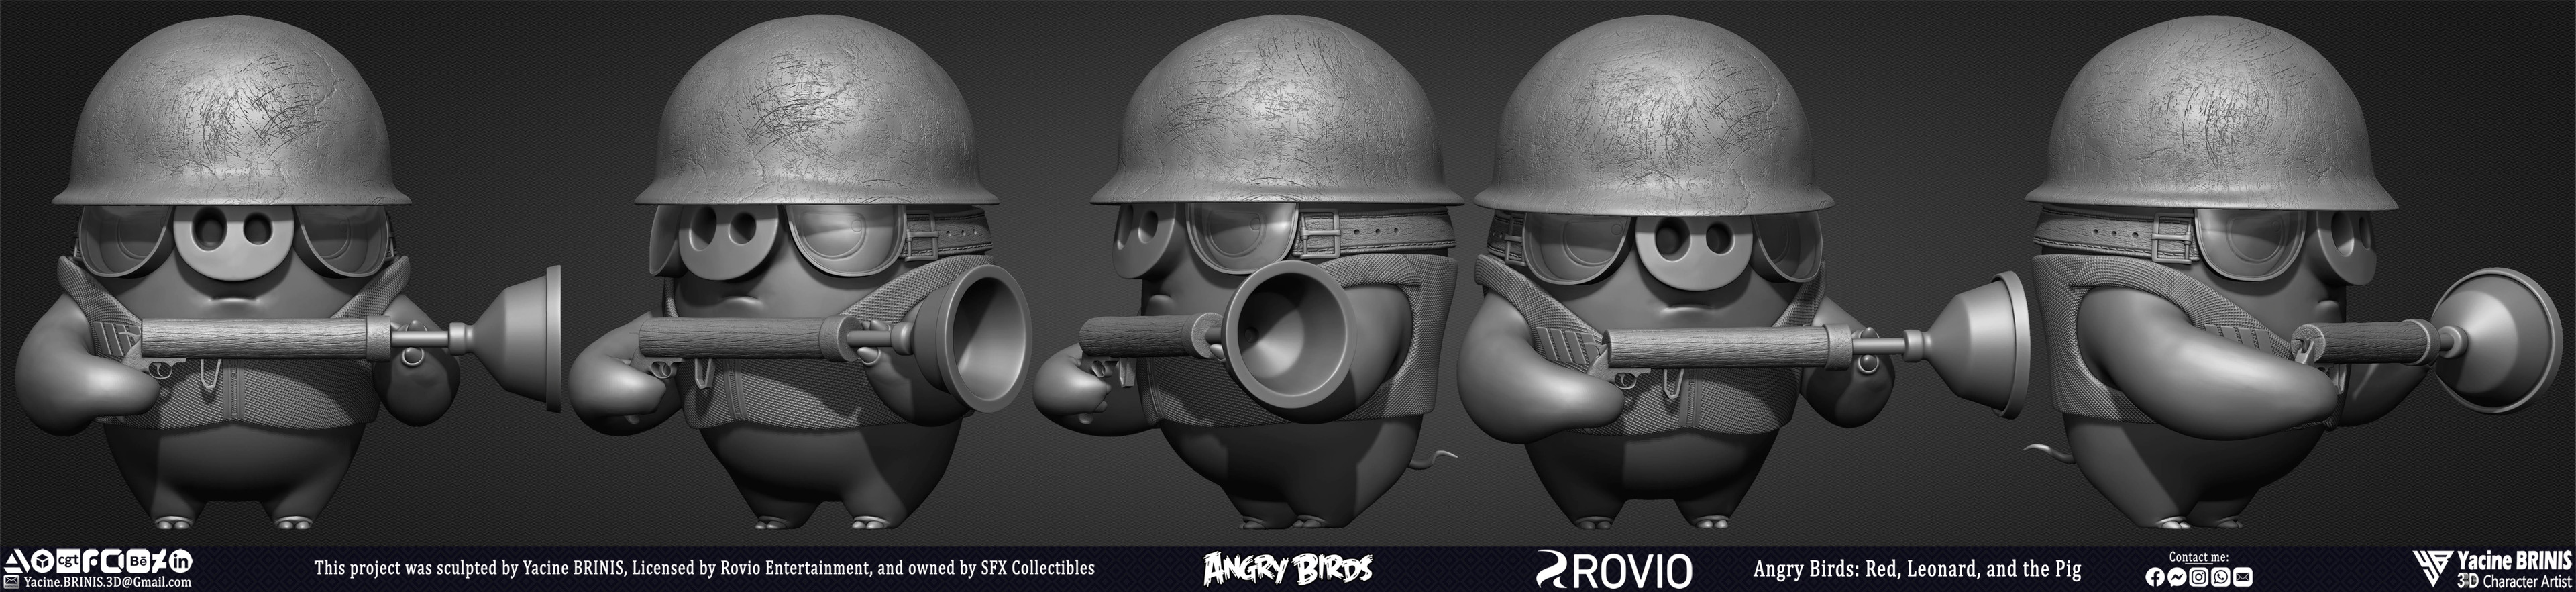 Red Leonard and the Pig Angry Birds Movie 2 Rovio Entertainment sculpted by Yacine BRINIS 003